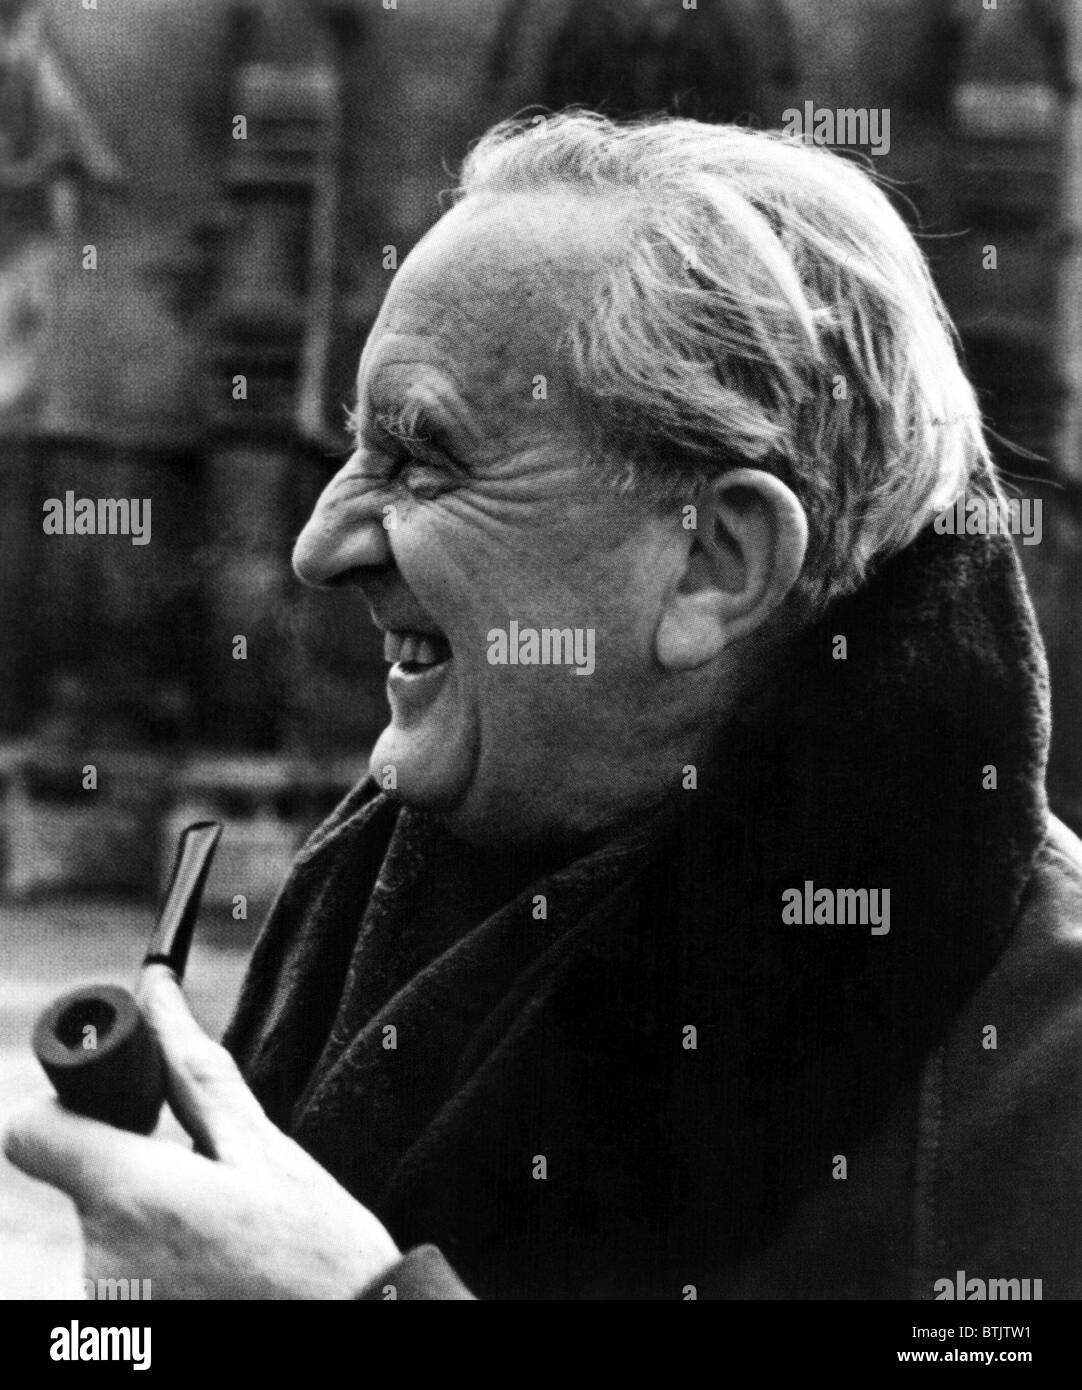 J.R.R. TOLKIEN, circa 1981, Author of The Hobbit, and The Lord Of The Rings. Image courtesy of CSU Archives' Stock Photo